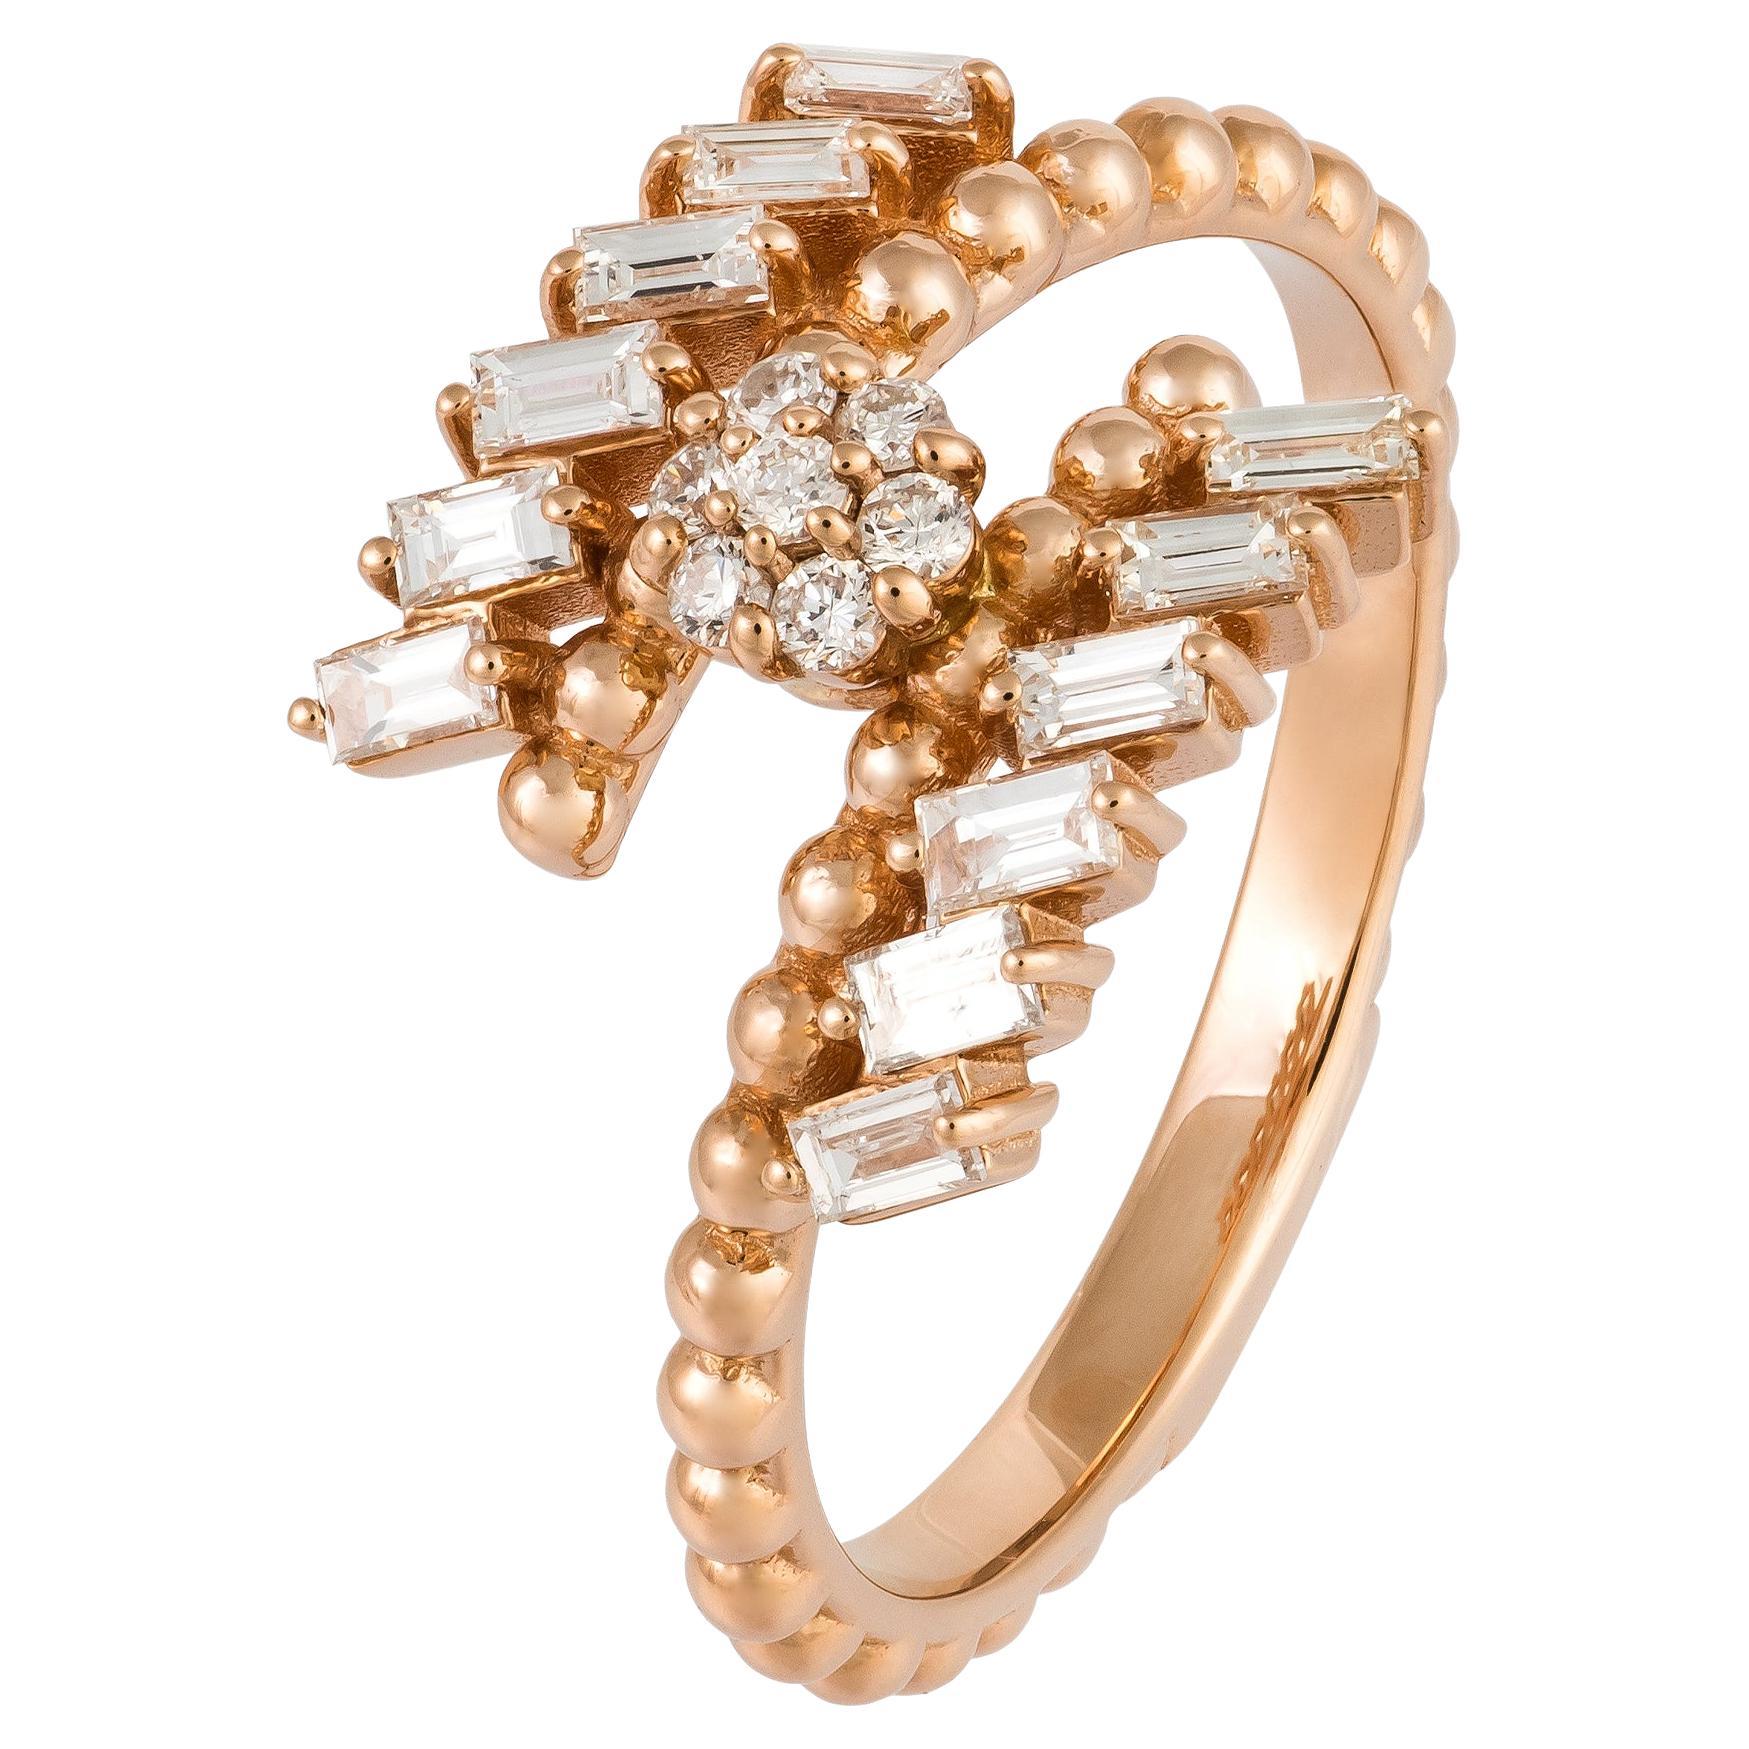 For Sale:  Stylish Pink 18K Gold White Diamond Ring for Her